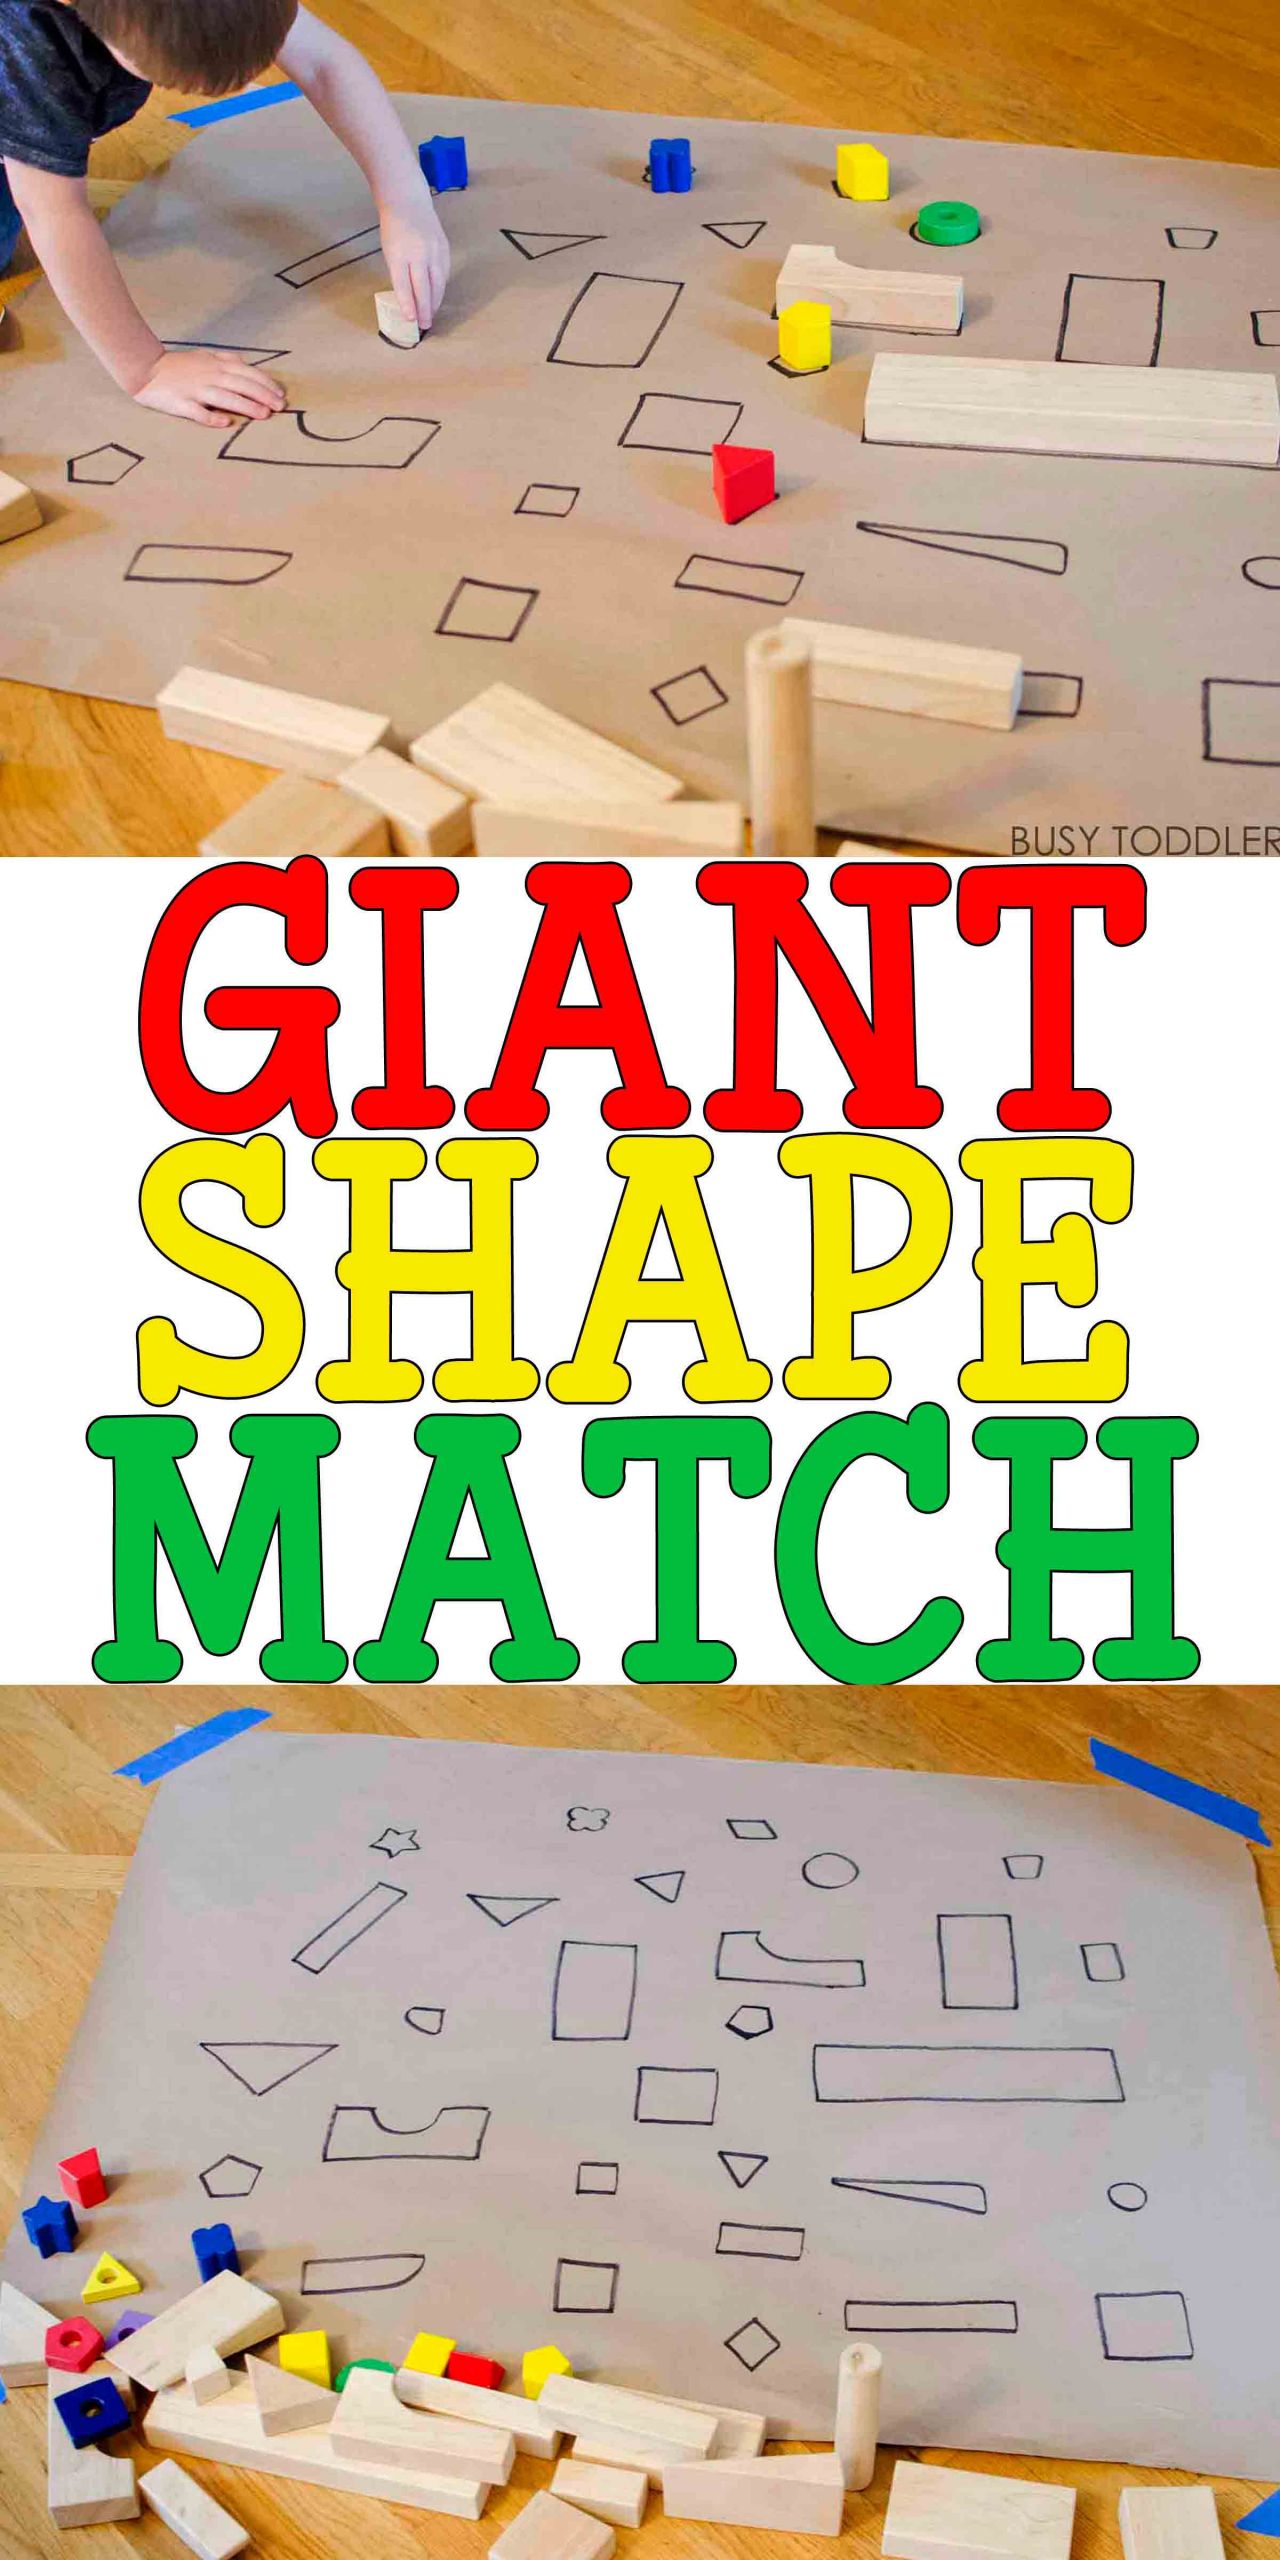 DIY Learning Activities For Toddlers
 Giant Shape Match Activity Busy Toddler